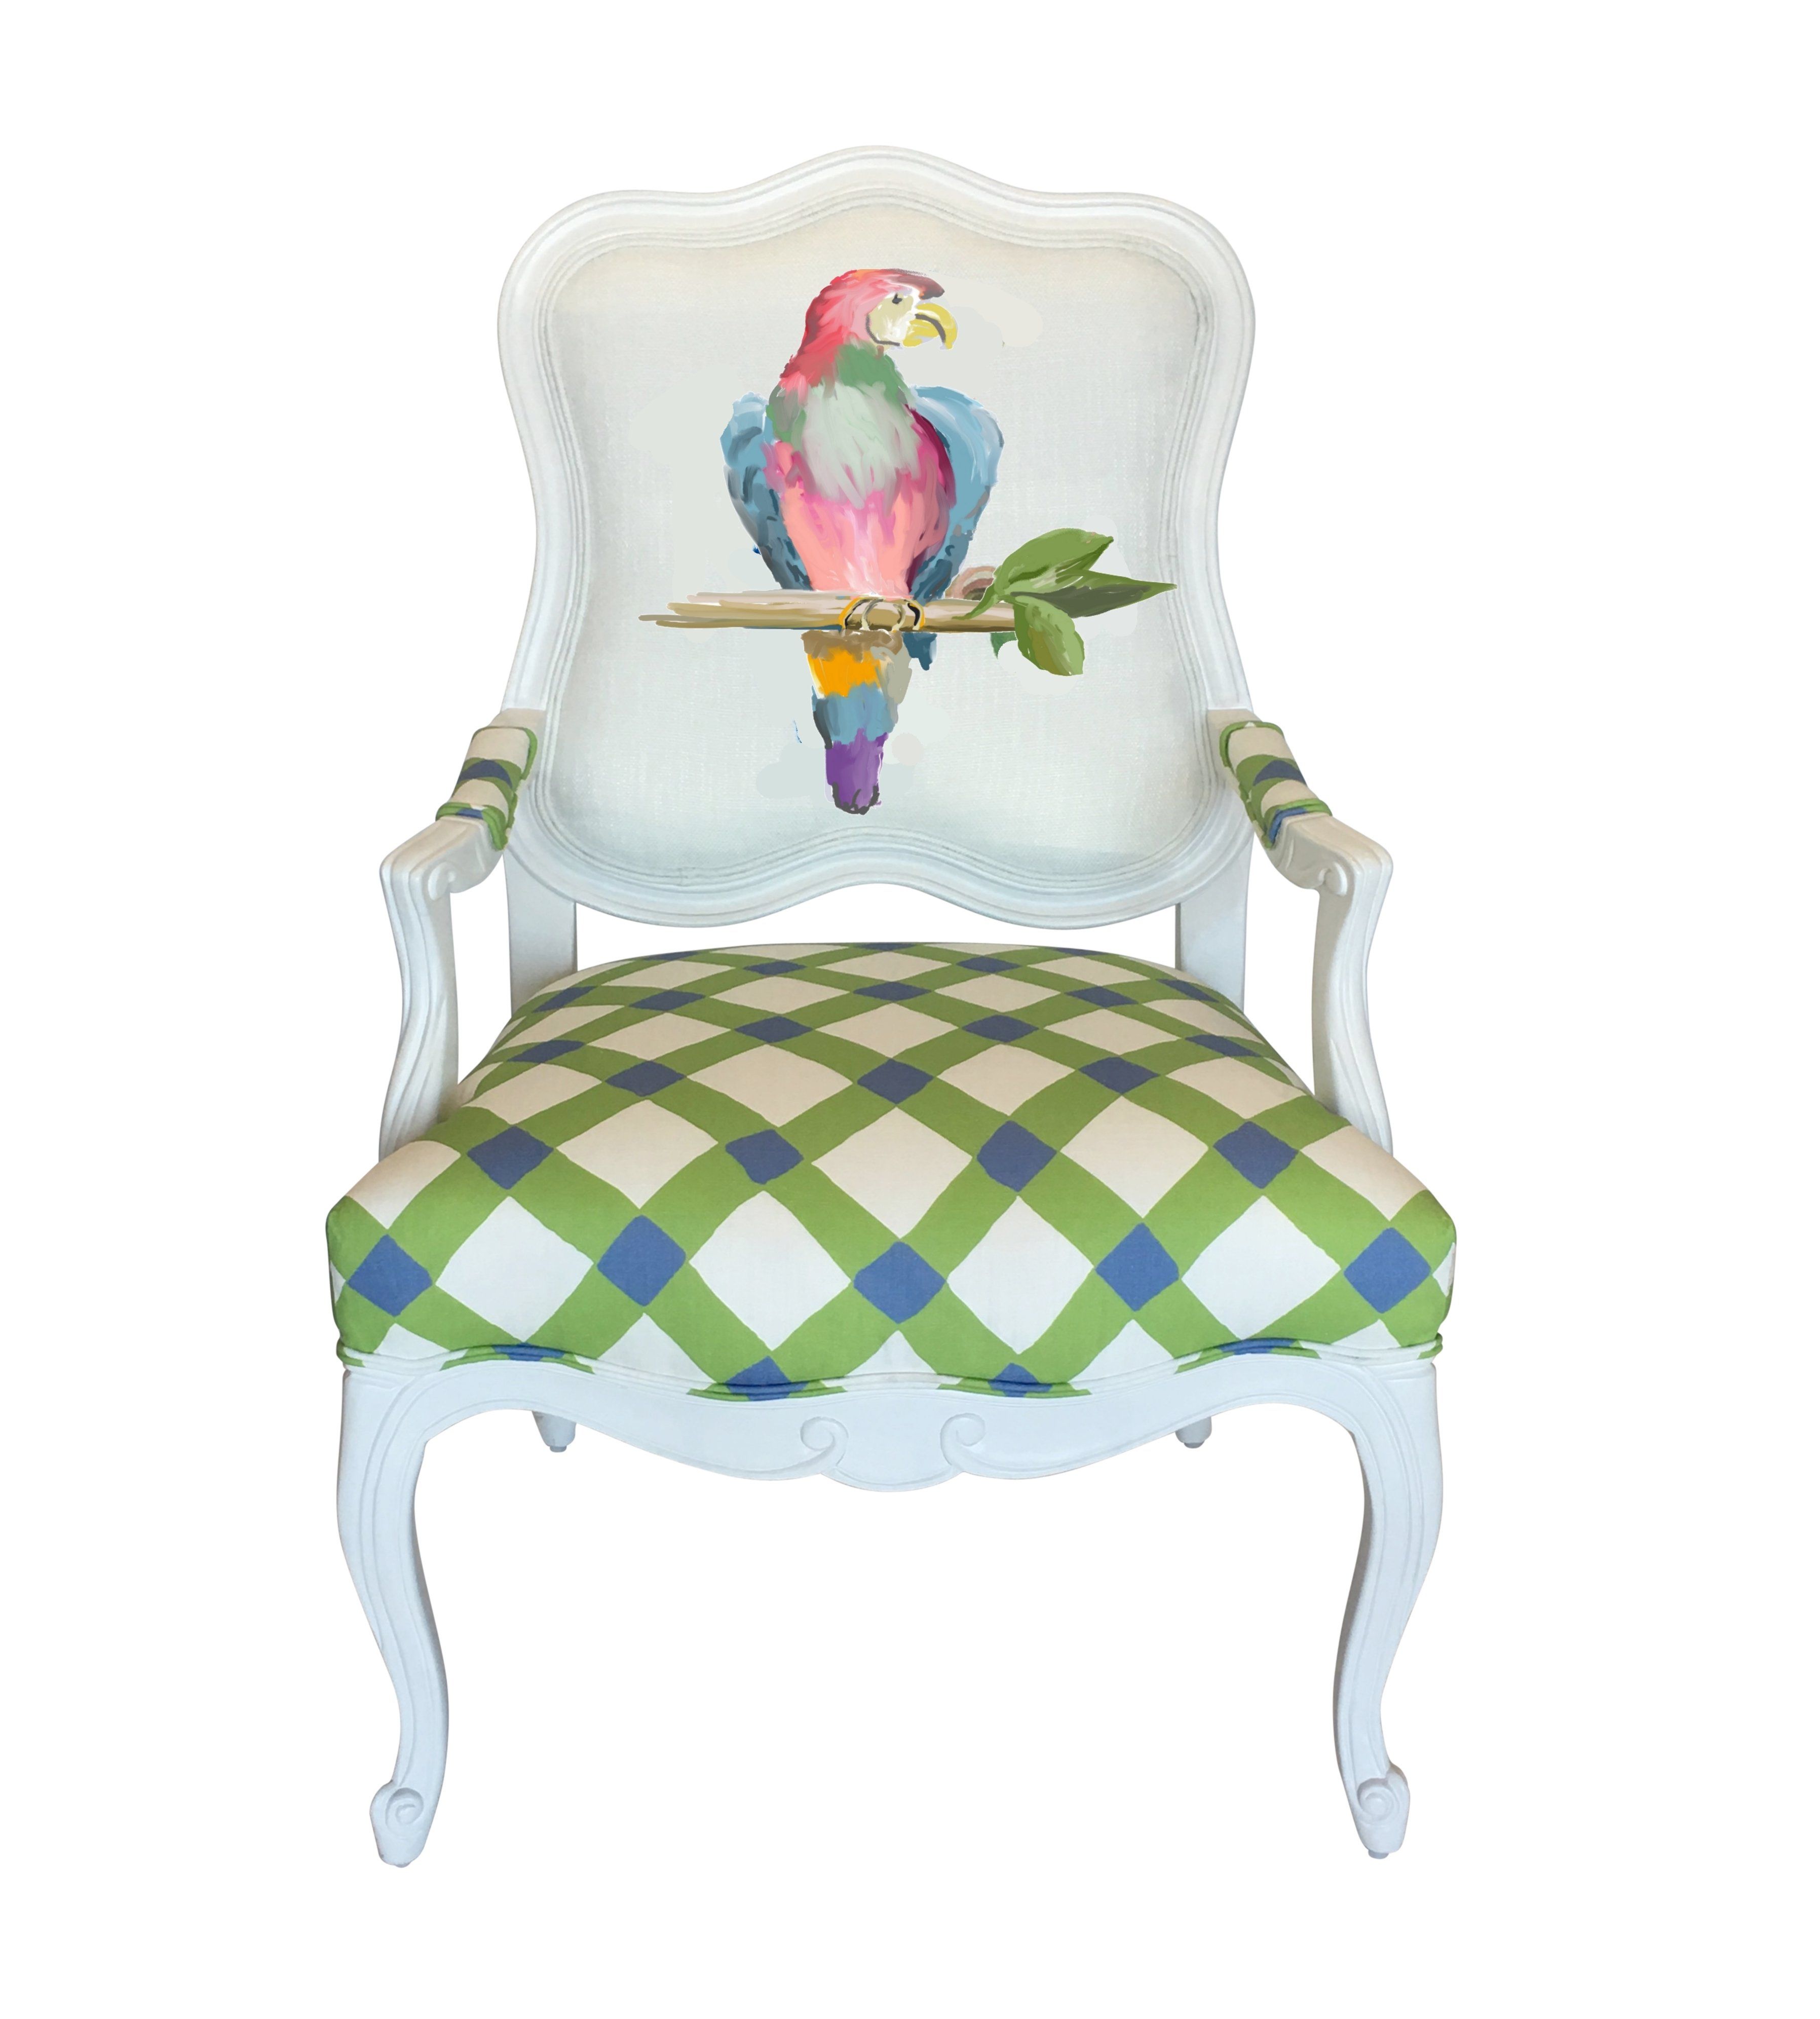 Parrot Chair in Multi